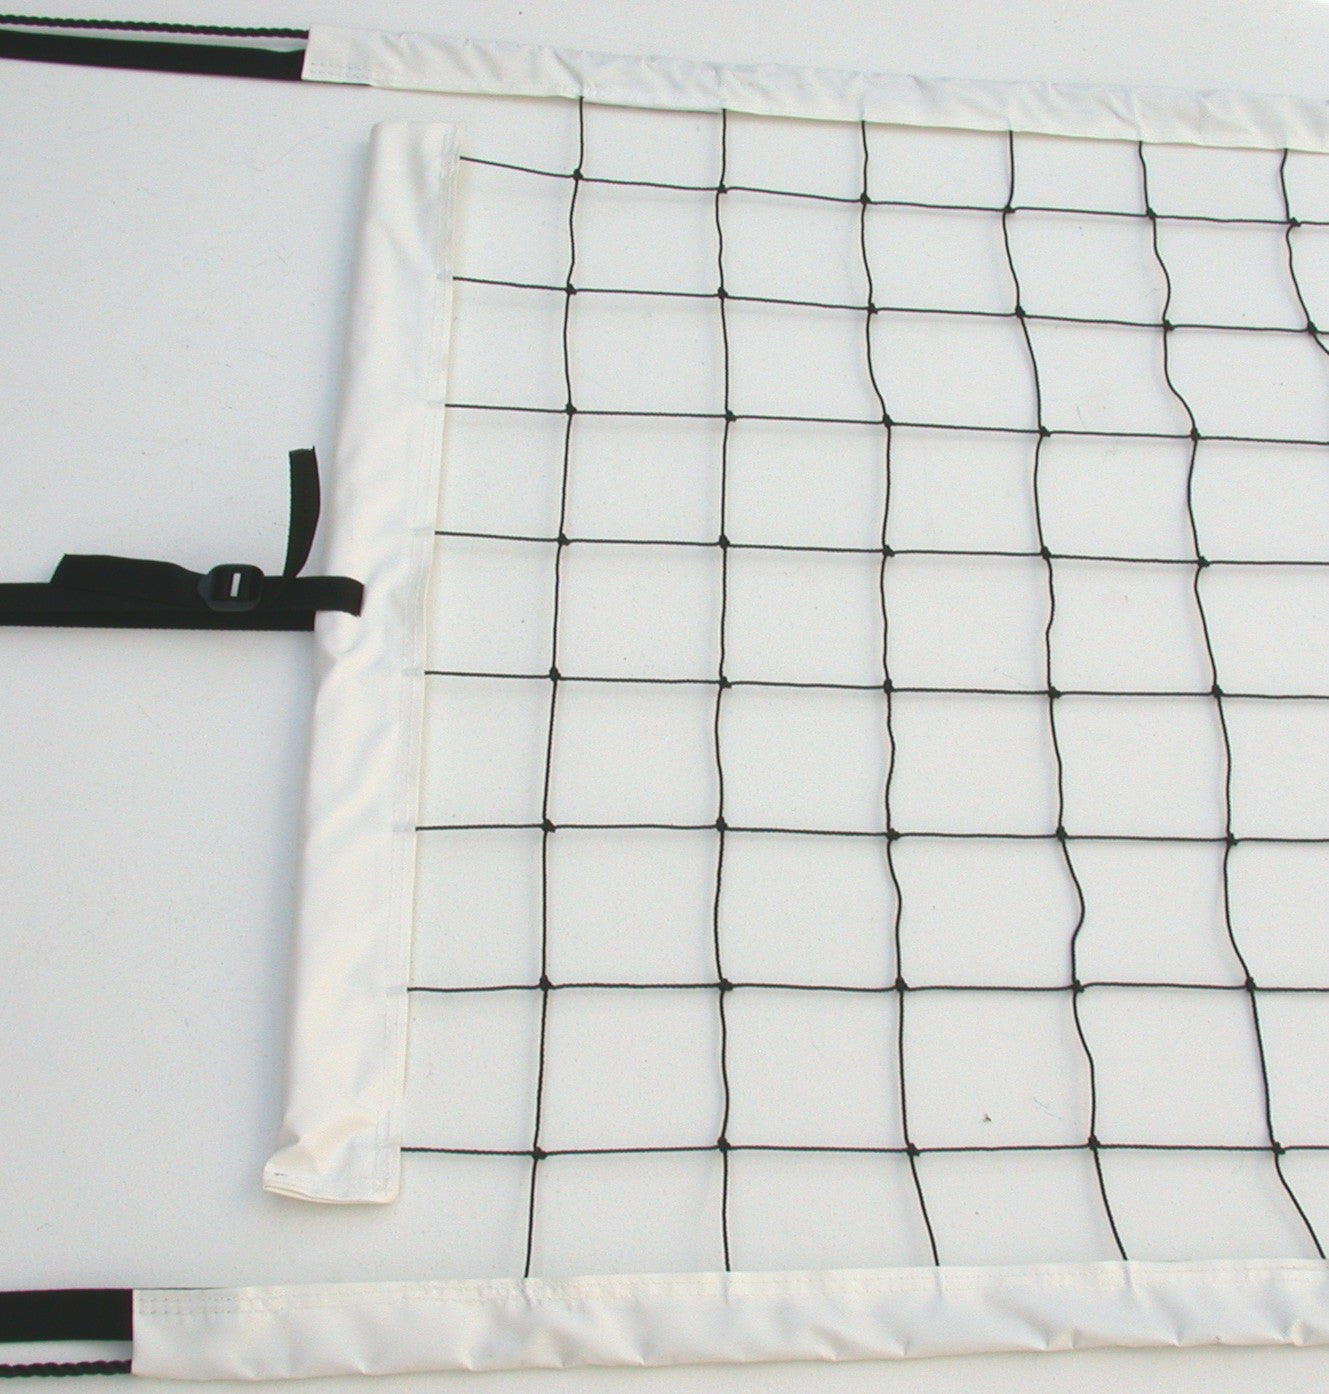 PNR-W-Power Volleyball Net Twisted Rope White Vinyl